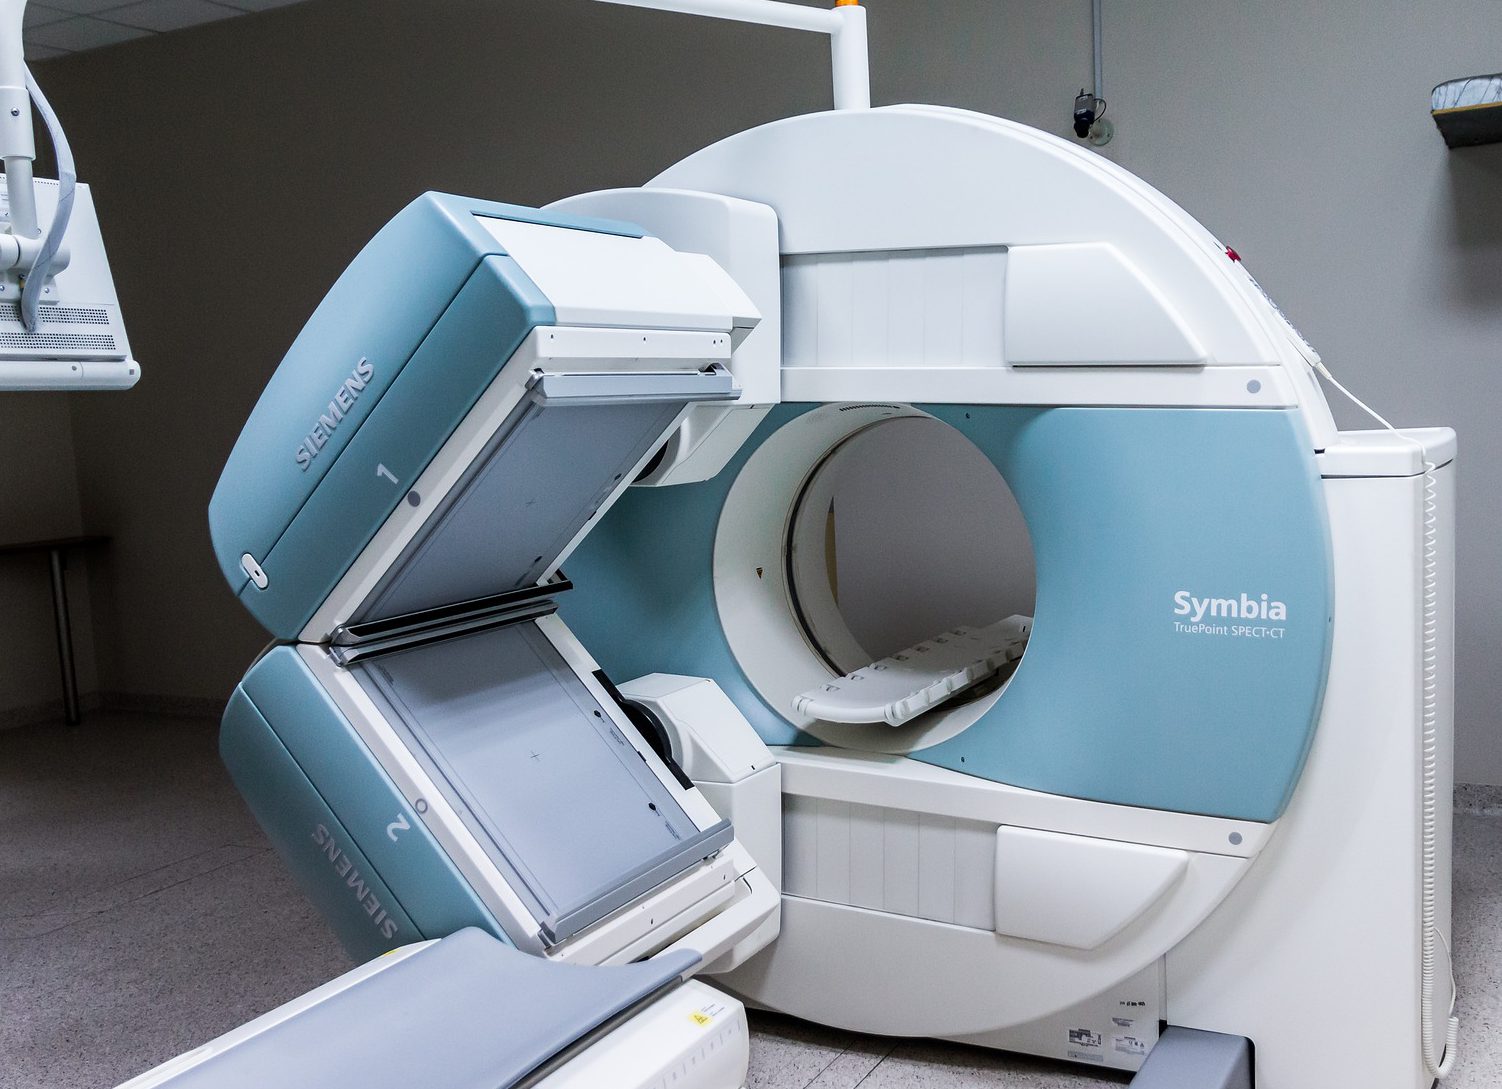 Global Diagnostic Imaging Equipment Market Report 2021 – Opportunities And Strategies, Market Forecast And Trends